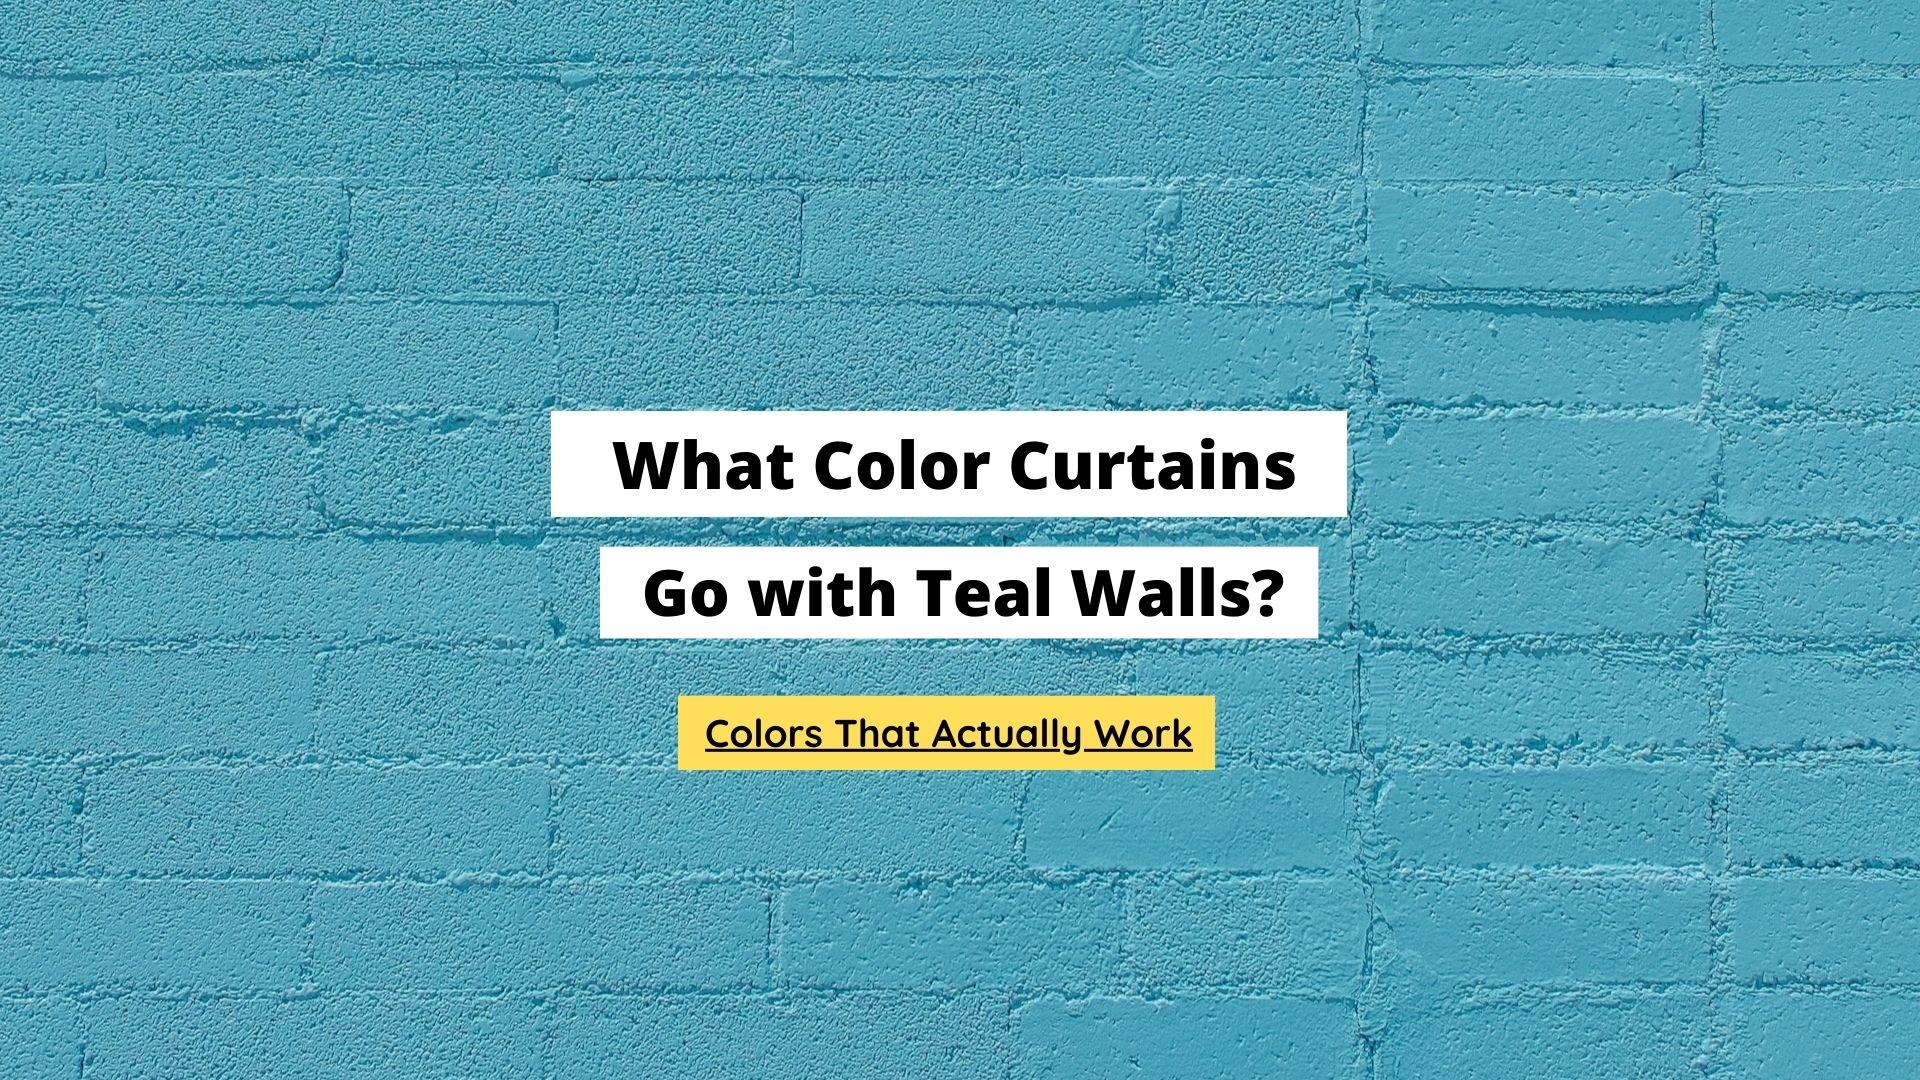 What Color Curtains Go with Teal Walls